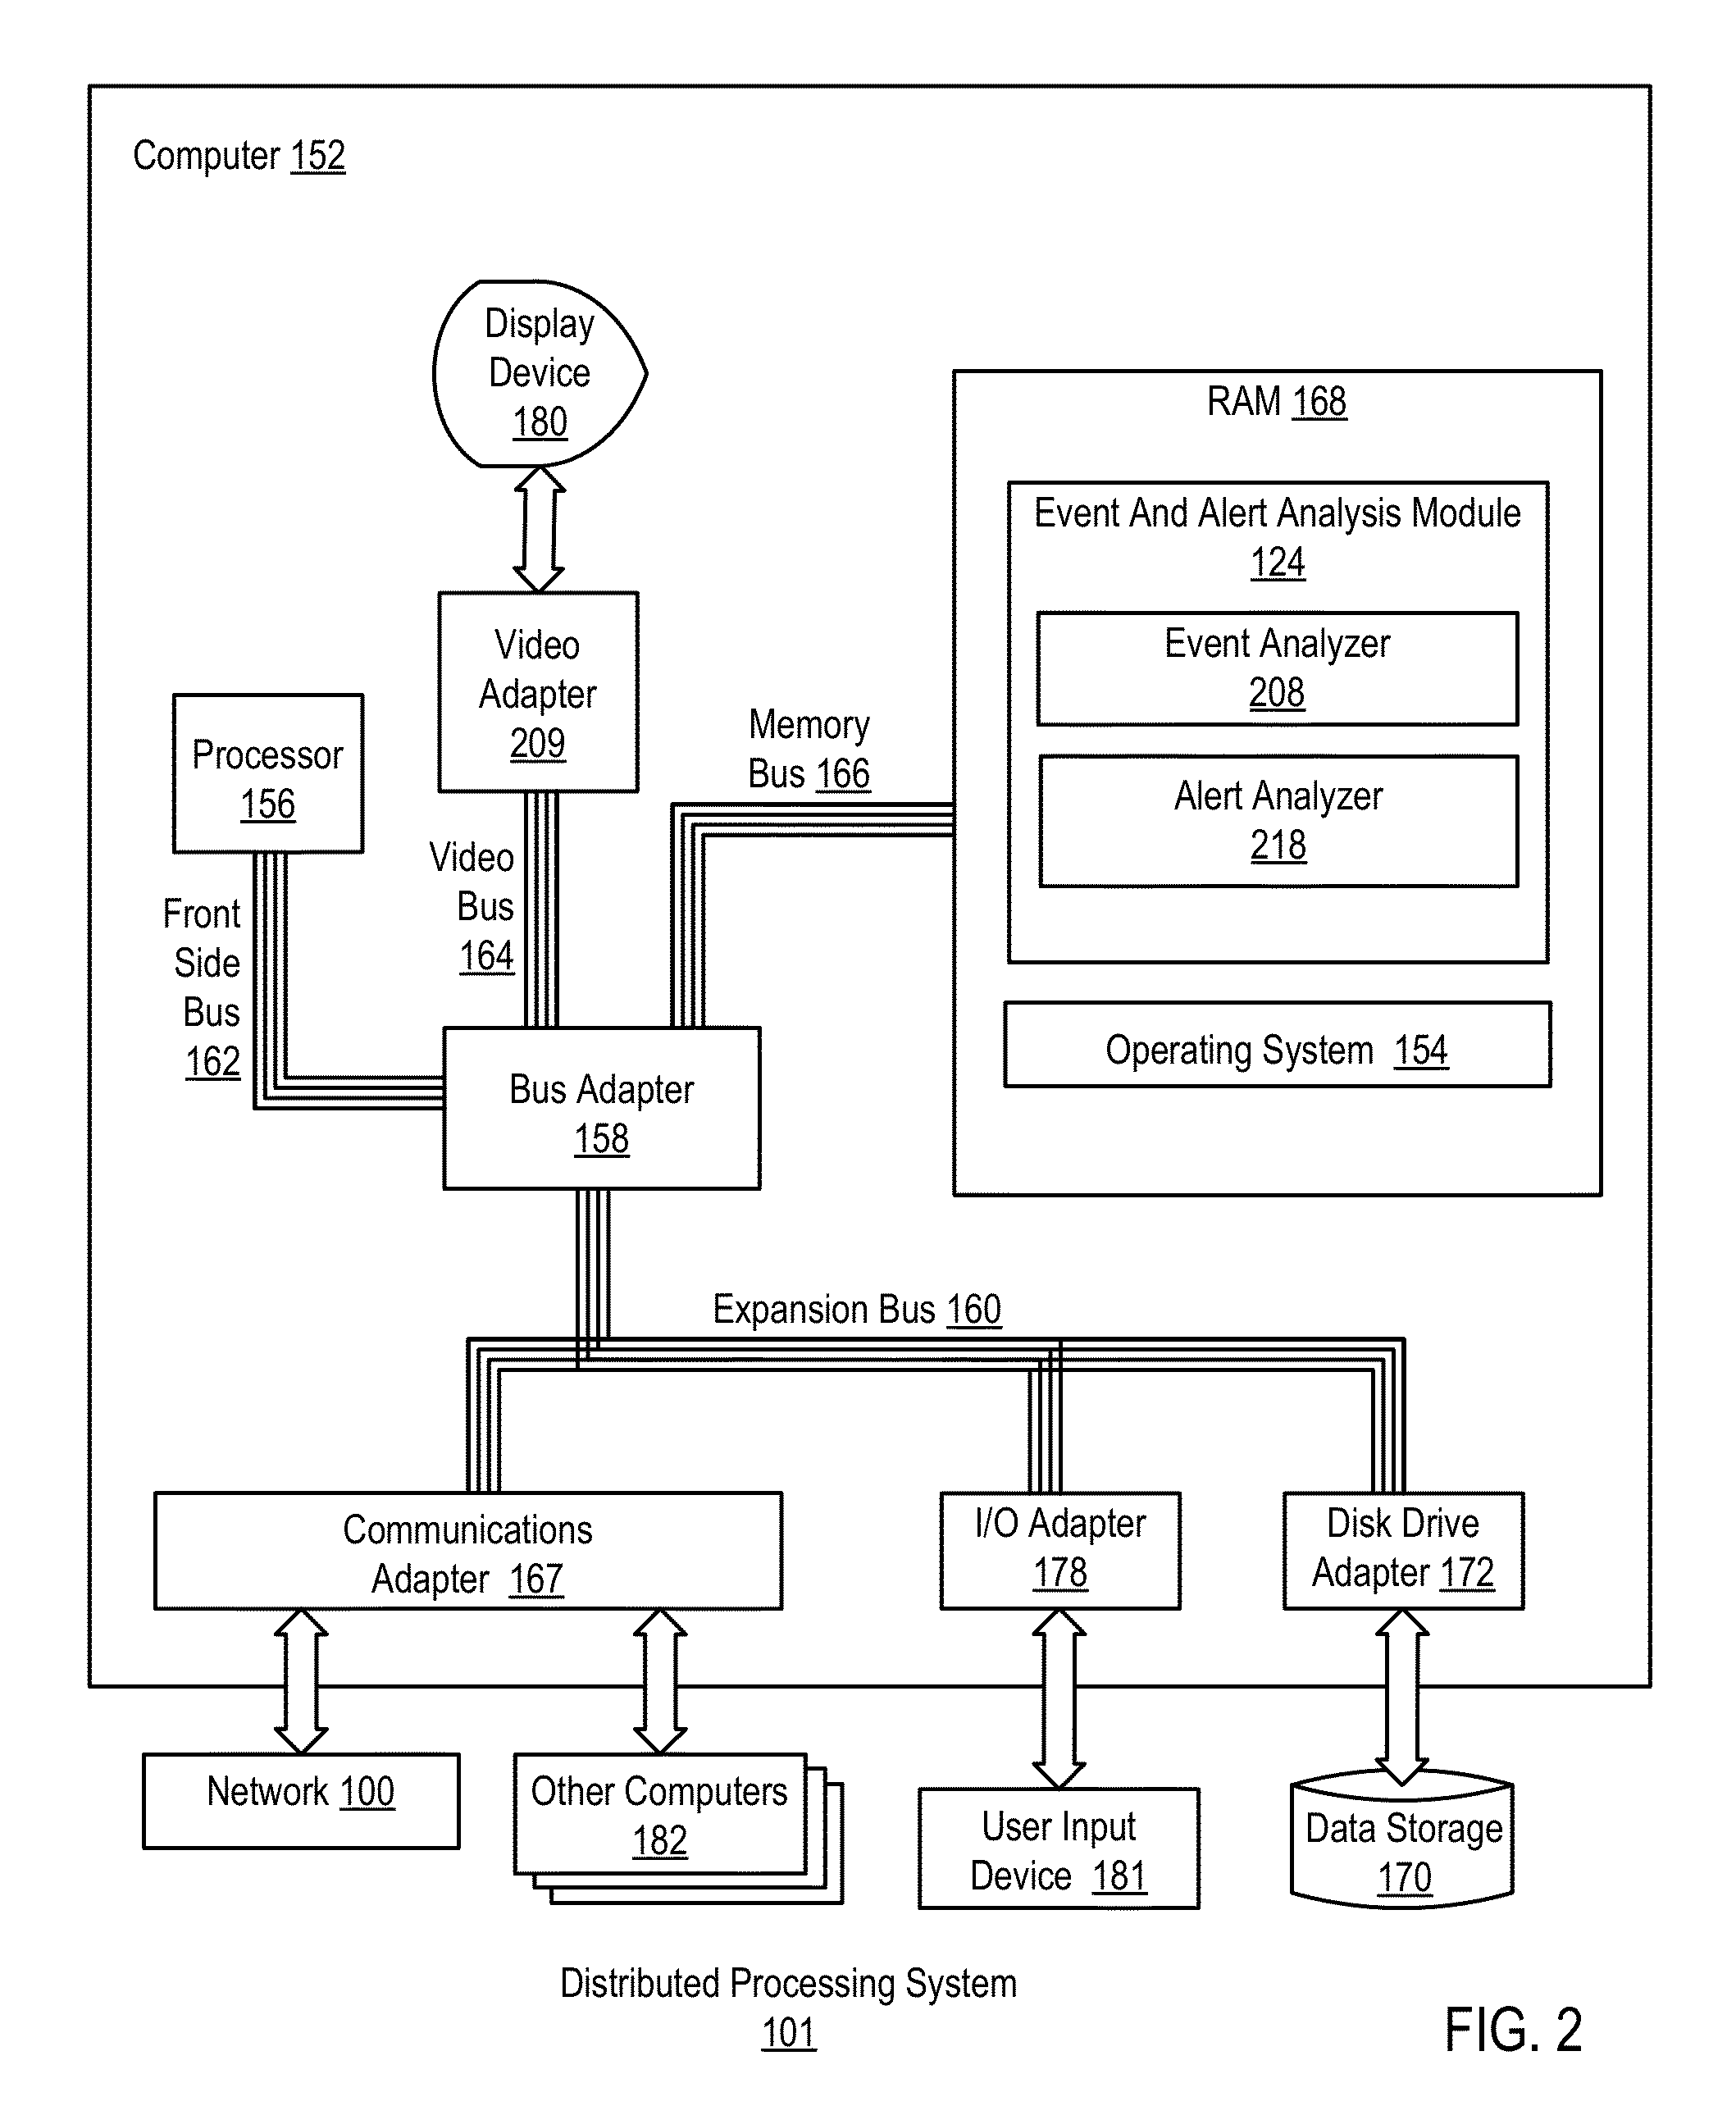 Administering event pools for relevant event analysis in a distributed processing system